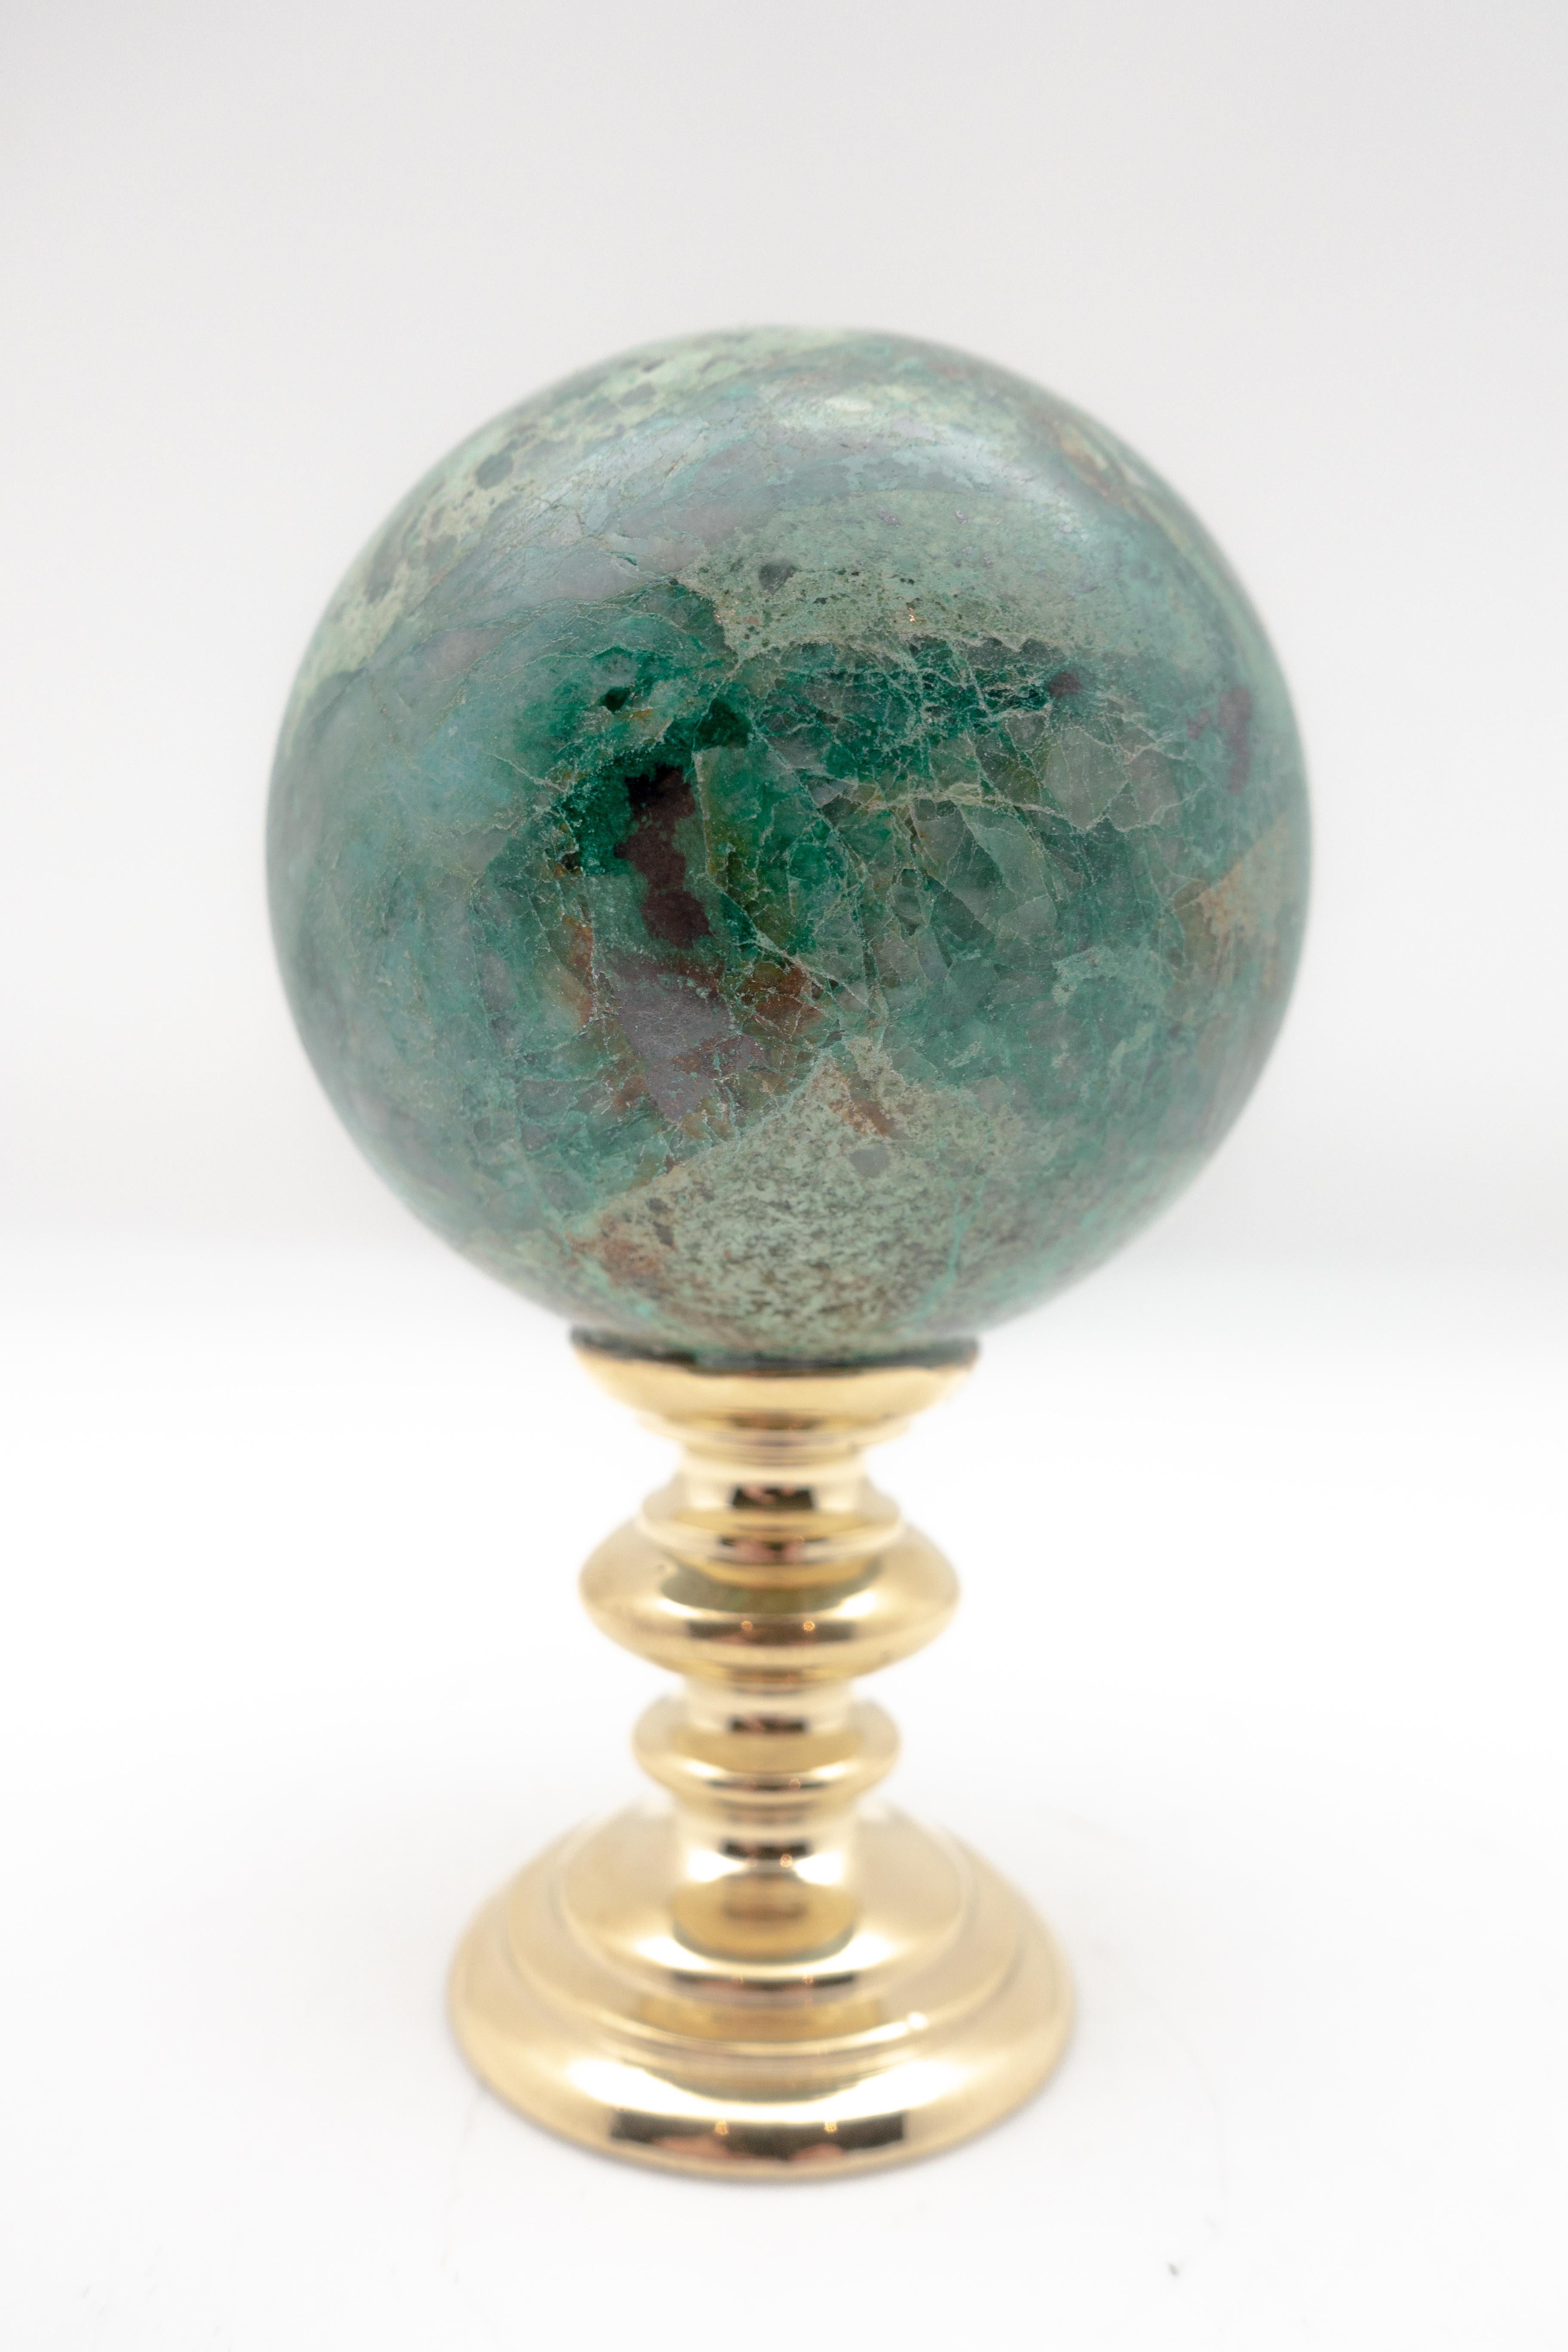 Chrysocolla sphere mounted on a brass stand. The beautiful blue-green of chrysocolla has made it a prized gemstone in ornamental use since antiquity. Measures: 2.75